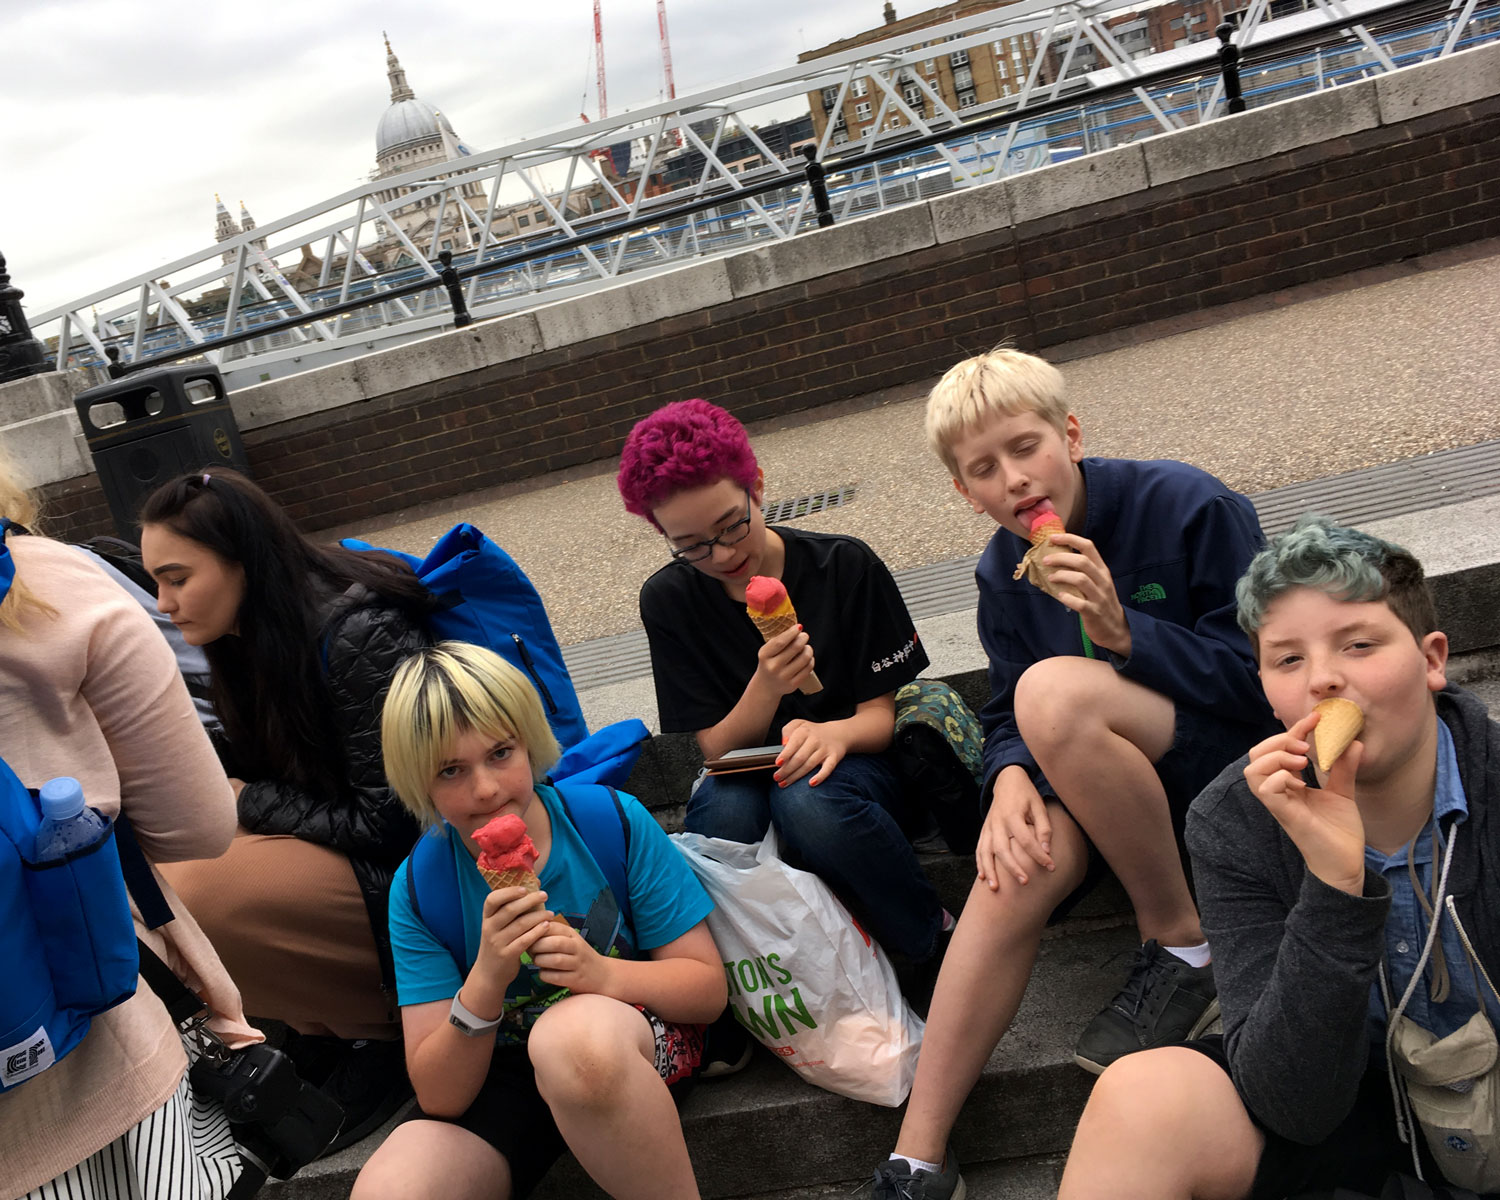 Enjoying ice cream on the banks of the River Thames